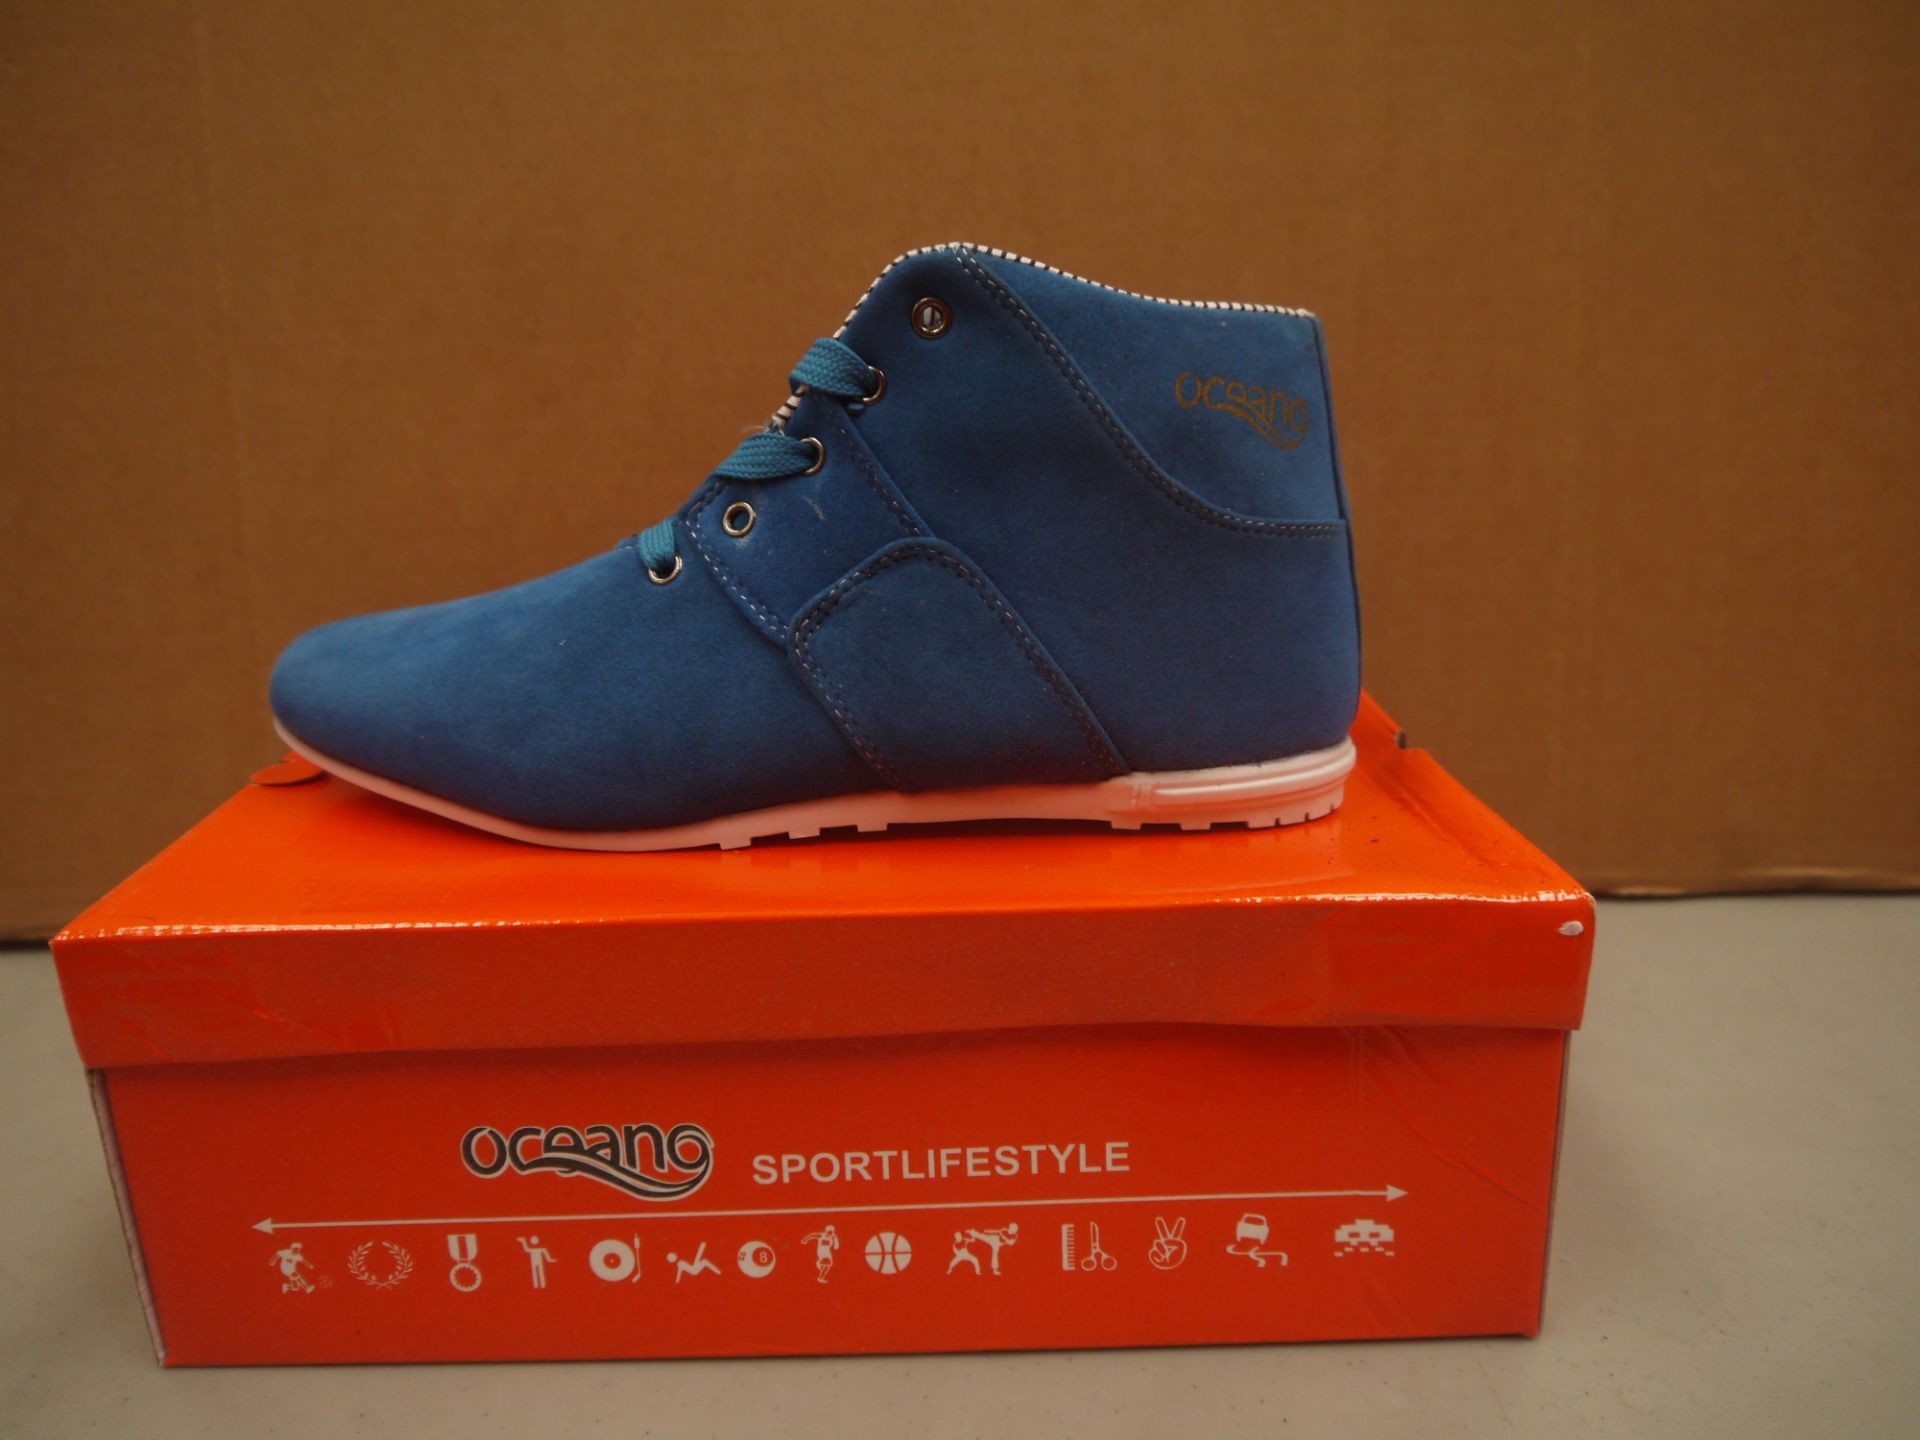 Mens Blue Suede Oceano trainer style boot new and boxed size UK9